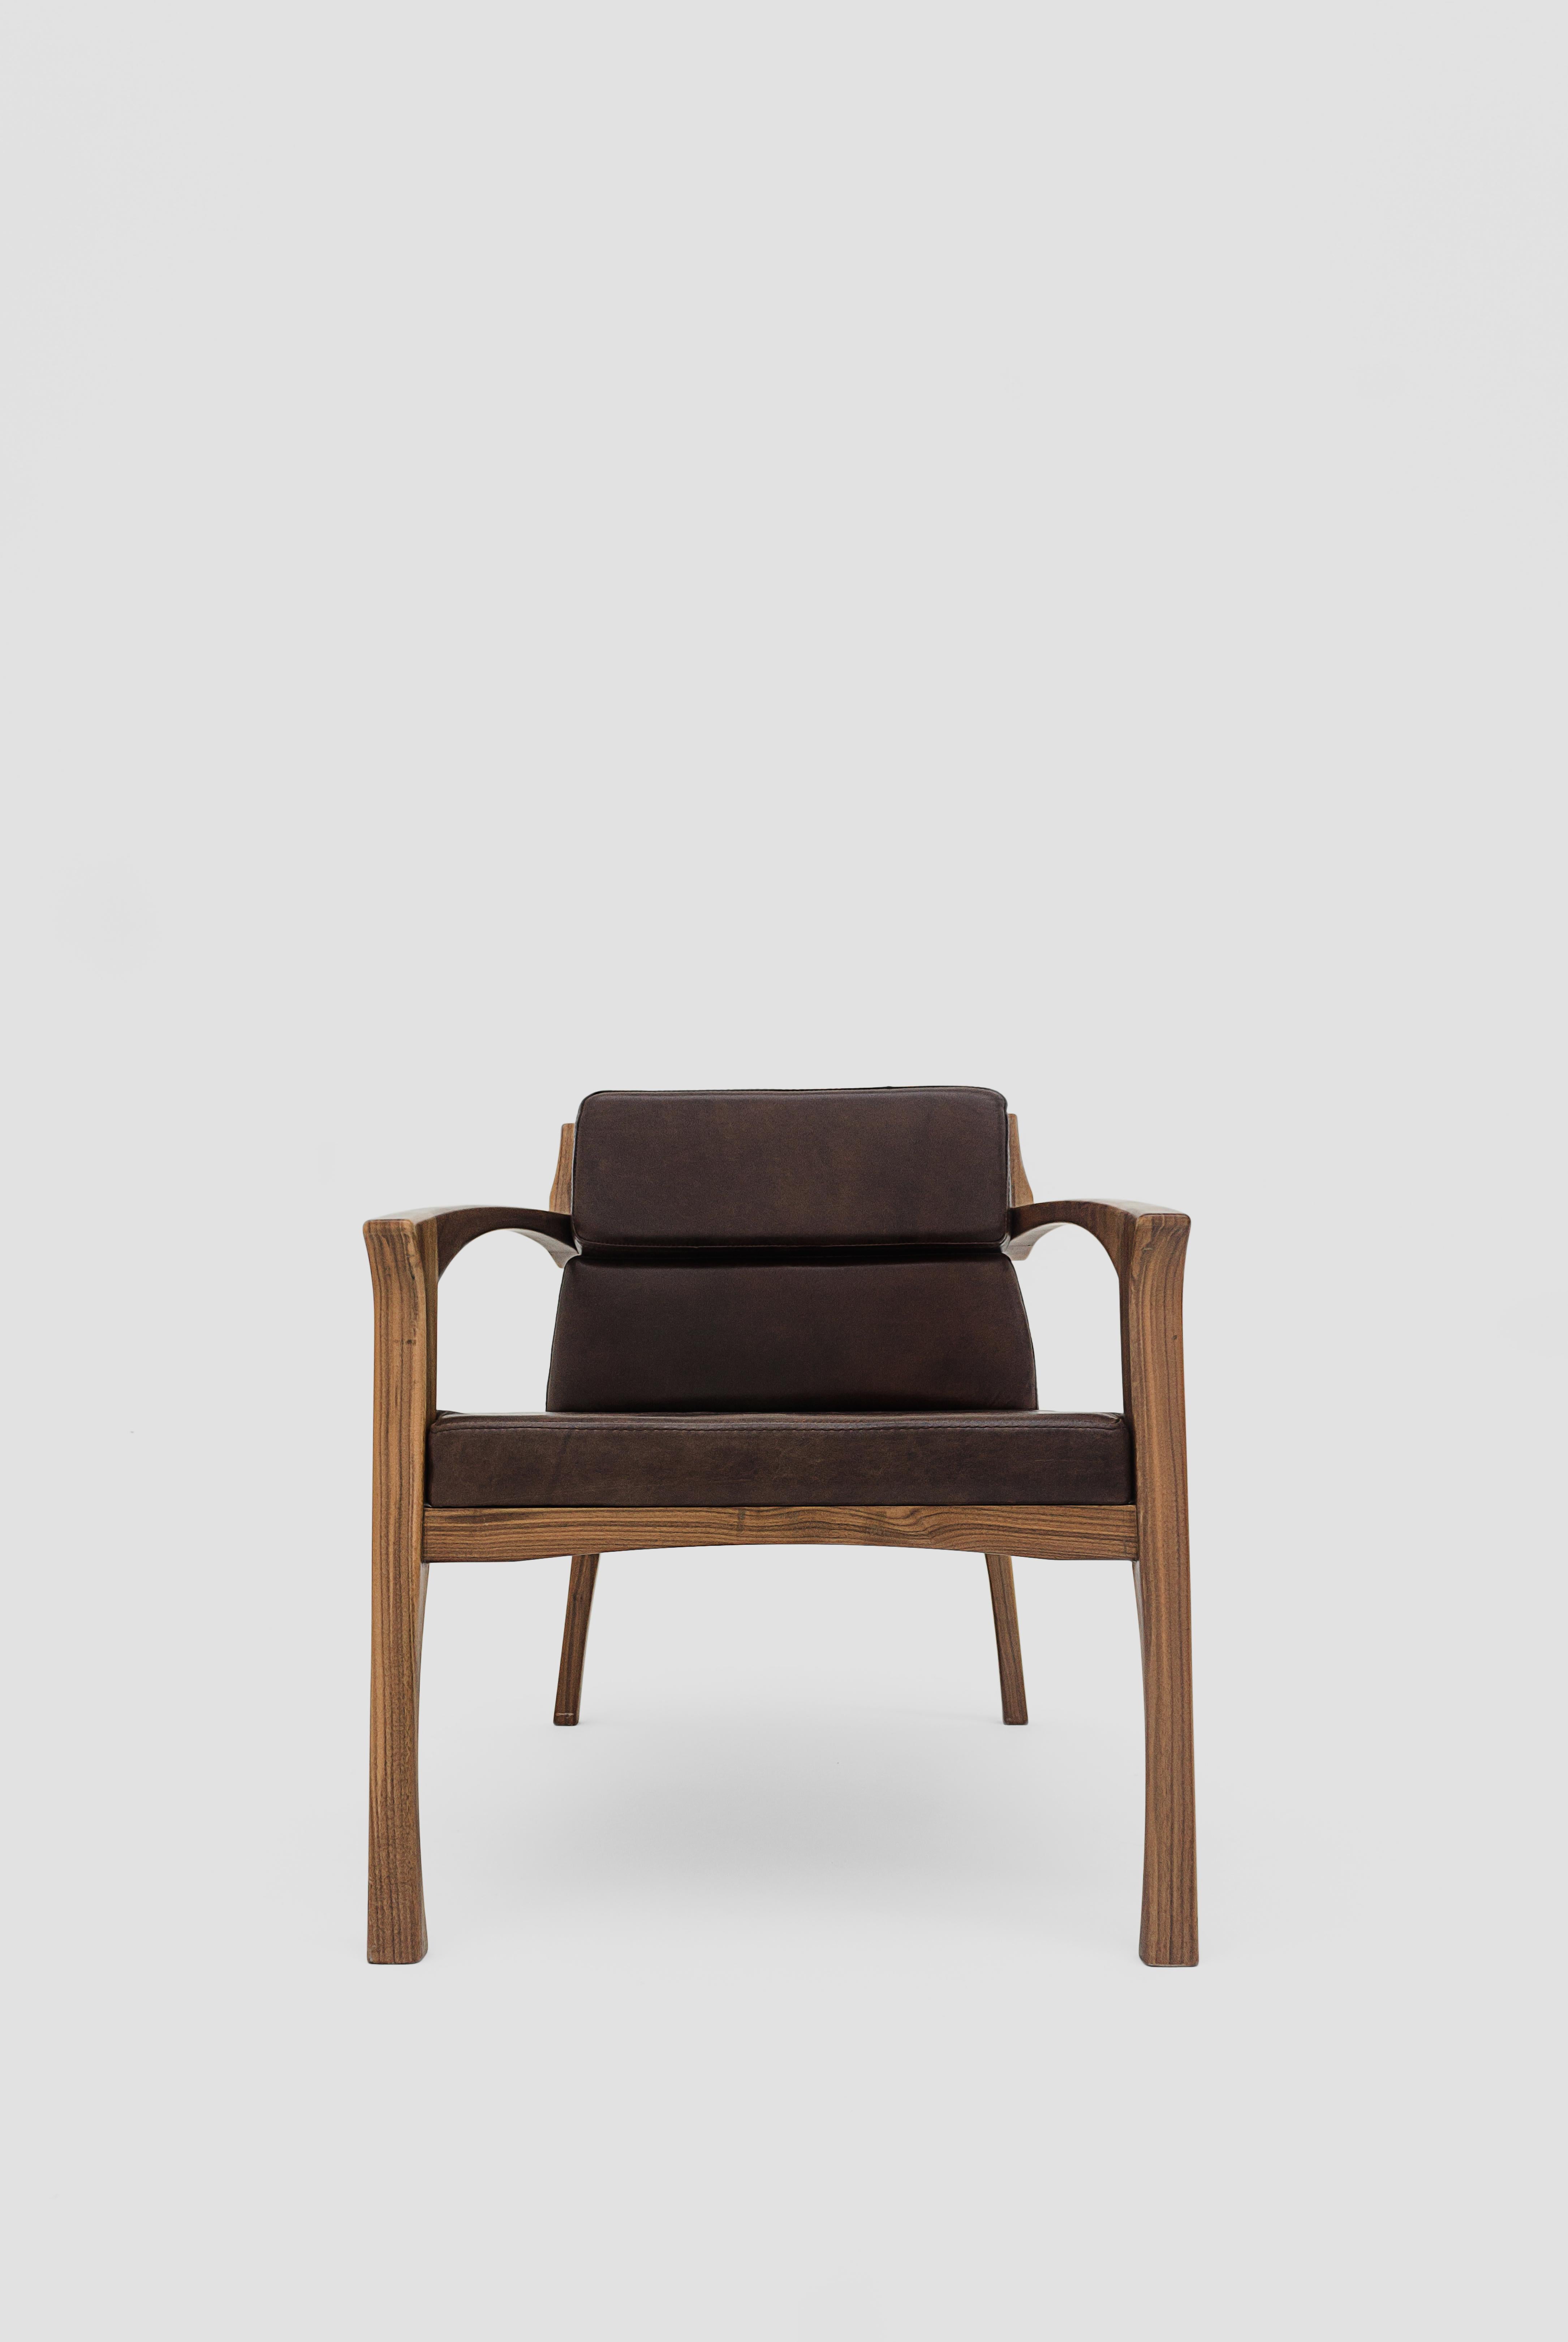 Set of 2 brown Helmut armchair by Arturo Verástegui
Dimensions: D 72 x W 76 x H 70 cm
Materials: walnut wood, leather.

Armchair made of solid holm walnut, leather.

Arturo Verástegui has been the director and founder of BREUER since 2015.